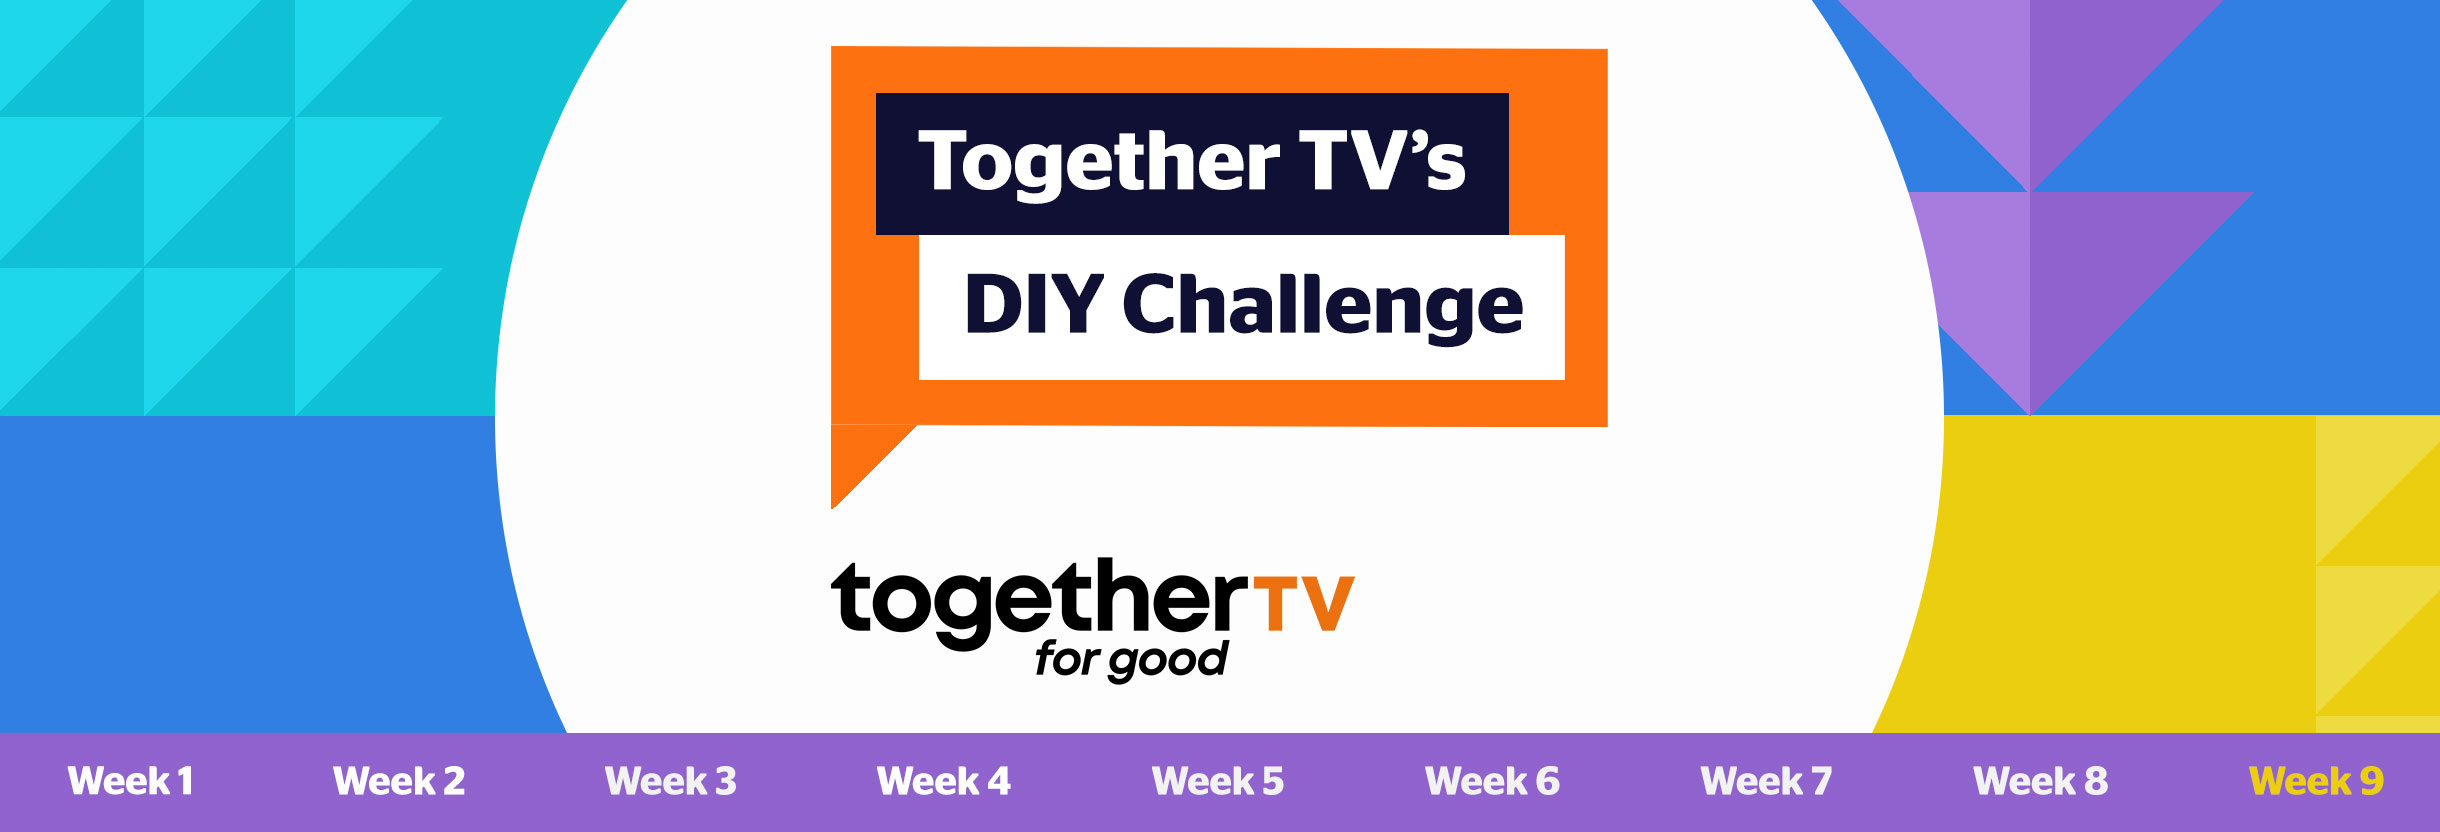 Welcome to week 9 of the DIY Challenge